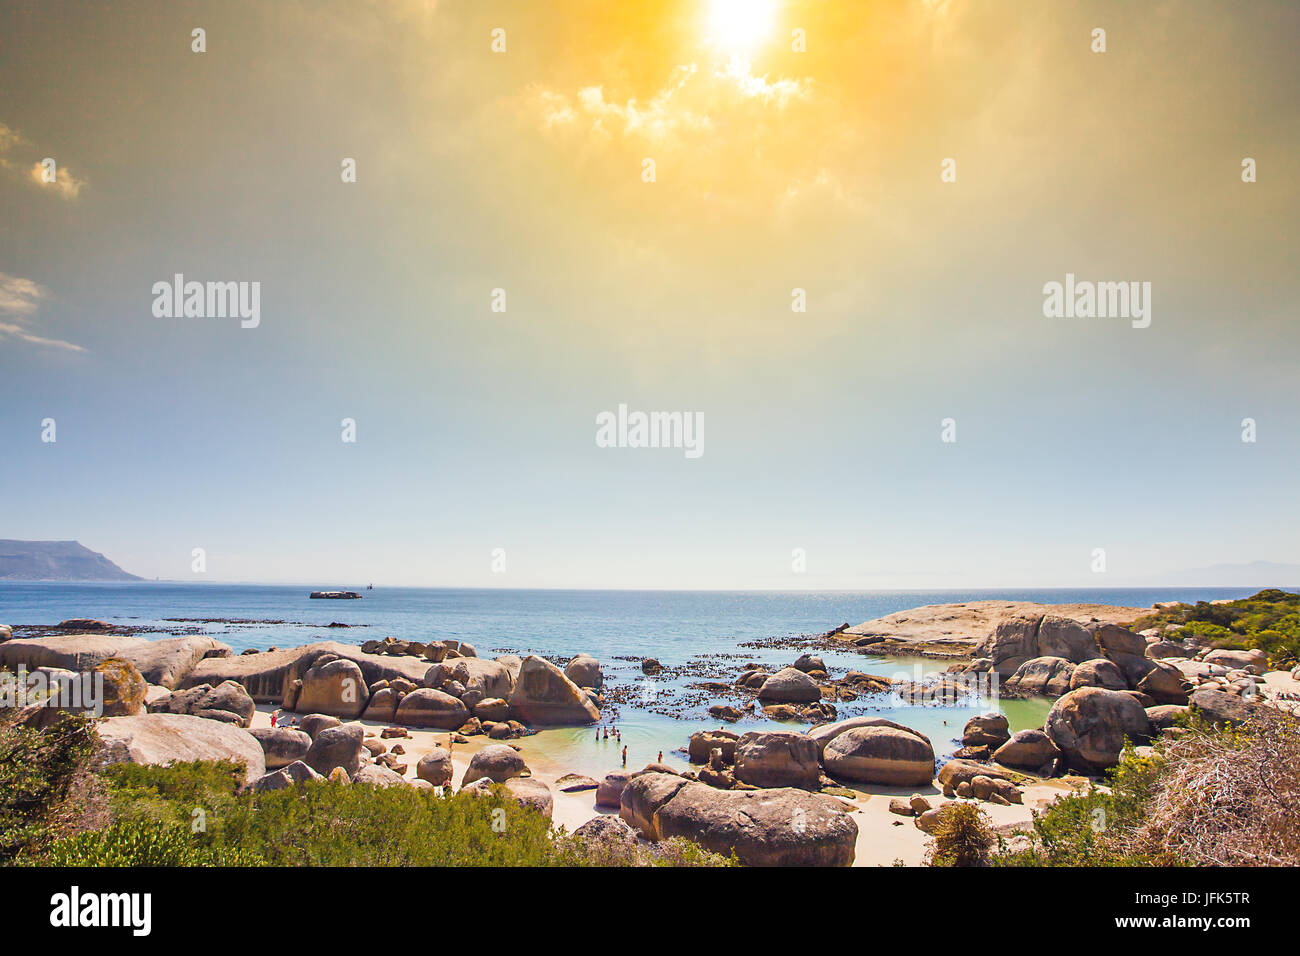 Penguin colony at False Bay in Simons Town South Africa Stock Photo